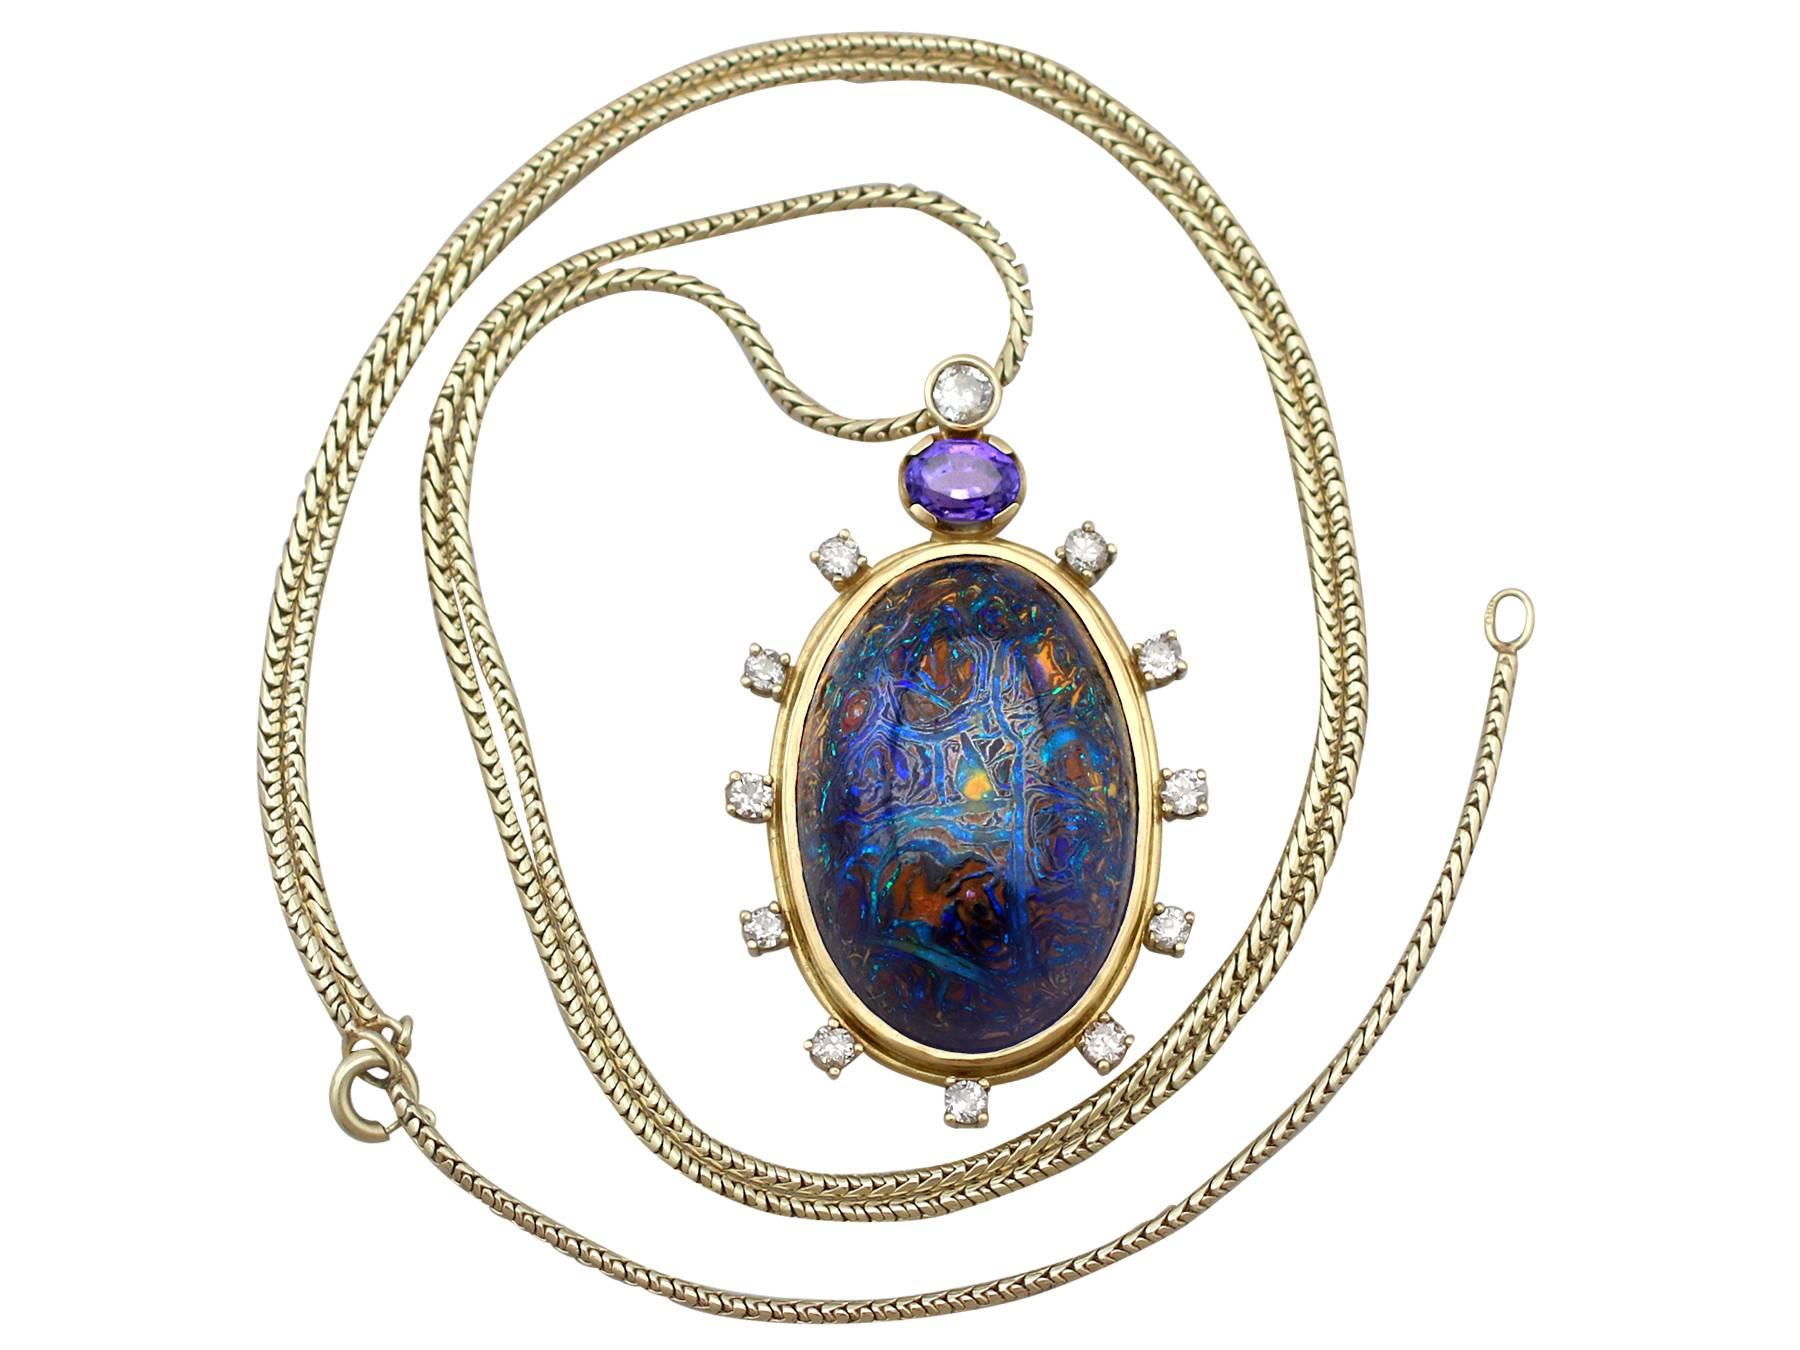 An exceptional vintage boulder opal, 1.52 carat sapphire and 1.28 carat diamond, 18 karat yellow gold pendant with a 14 karat yellow gold snake chain; part of our diverse vintage jewelry collections.

This exceptional and stunning cabochon cut